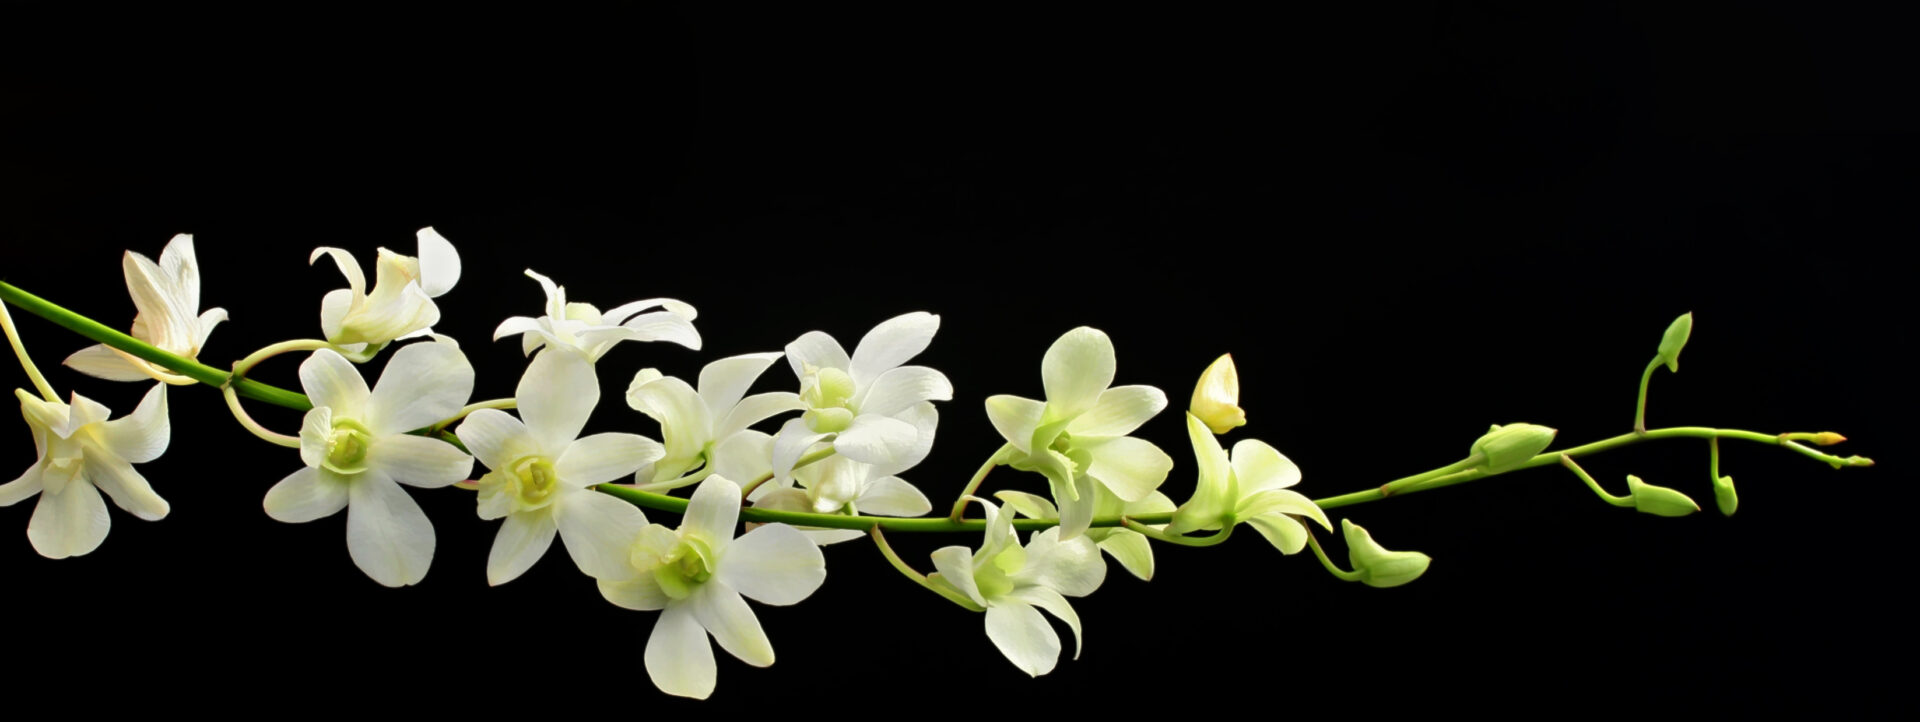 White-green orchid spray, with black background.